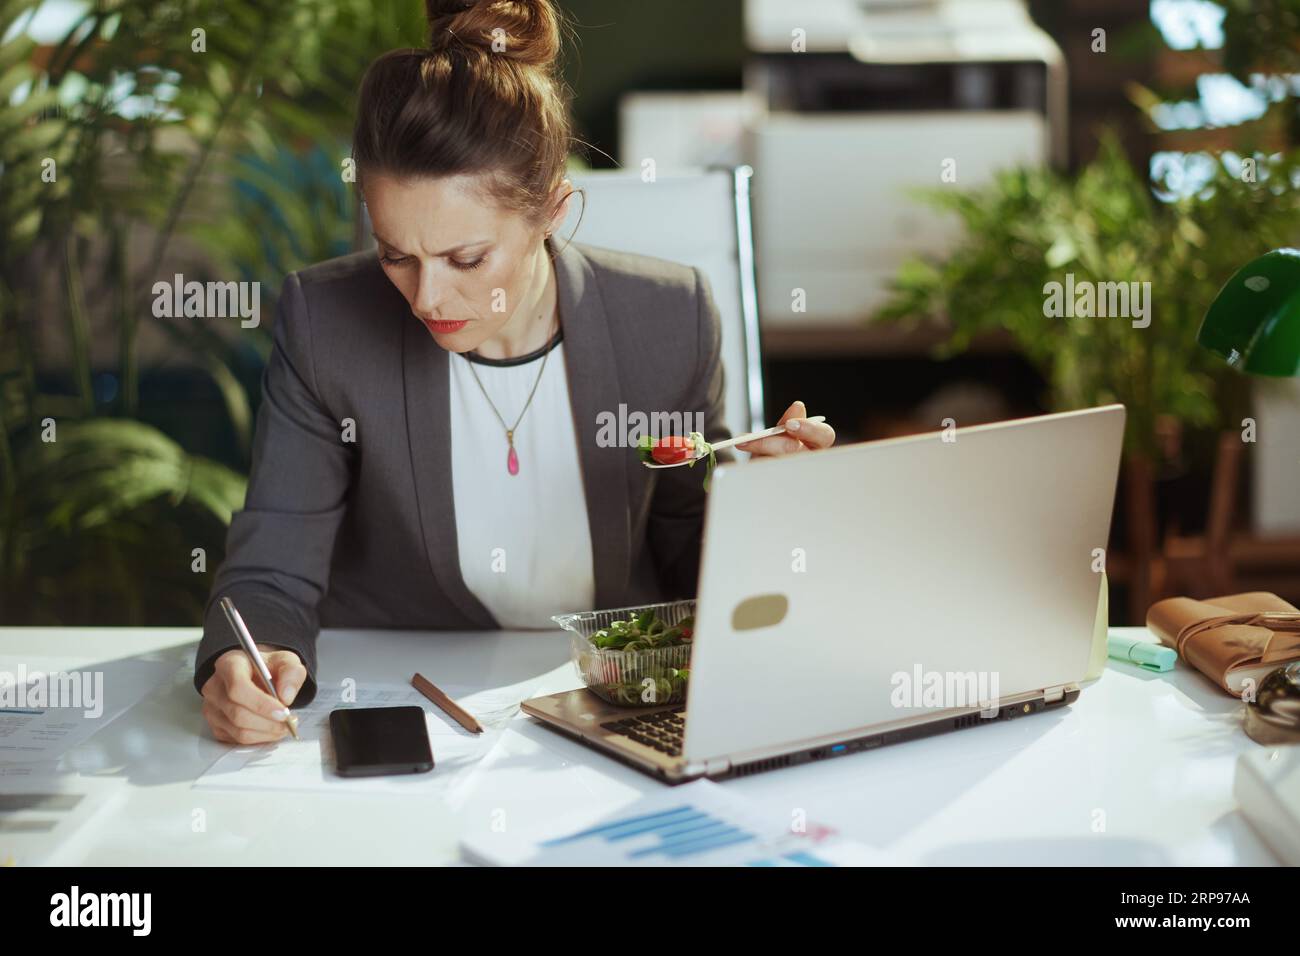 Sustainable workplace. concerned modern business woman in a grey business suit in modern green office with laptop eating salad and using smartphone. Stock Photo